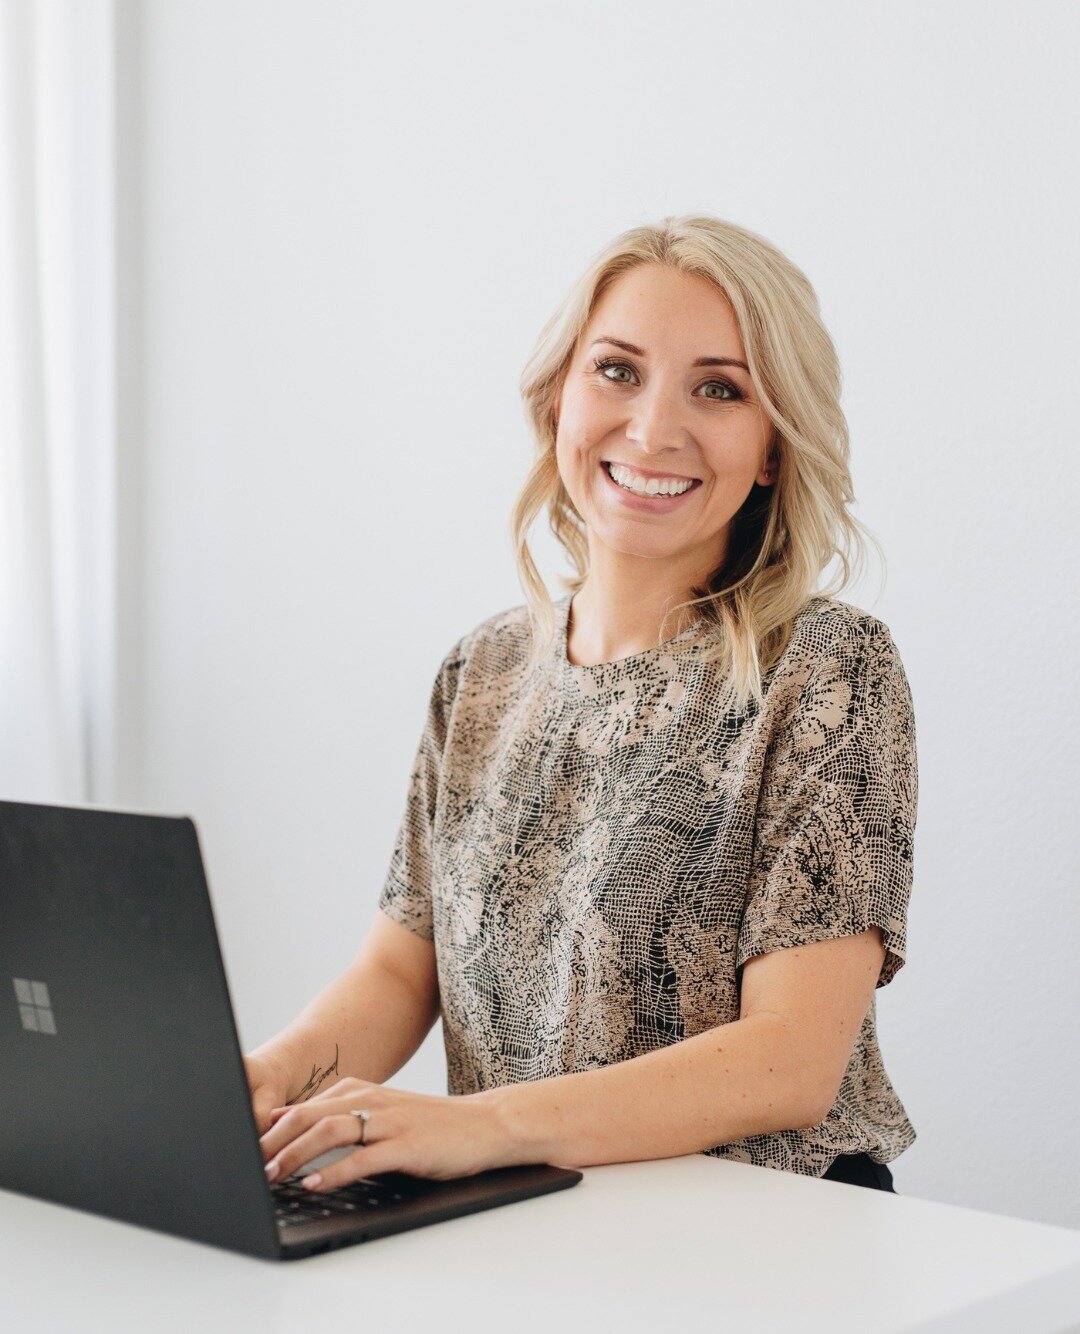 Our fearless leader, Ashley, has graced the pages of Canvas Rebel with her entrepreneurial wisdom. She&rsquo;s been featured in an article on their website! 👏⁠
⁠
That&rsquo;s right! She&rsquo;s spilling the tea on what it takes to make it in the bus